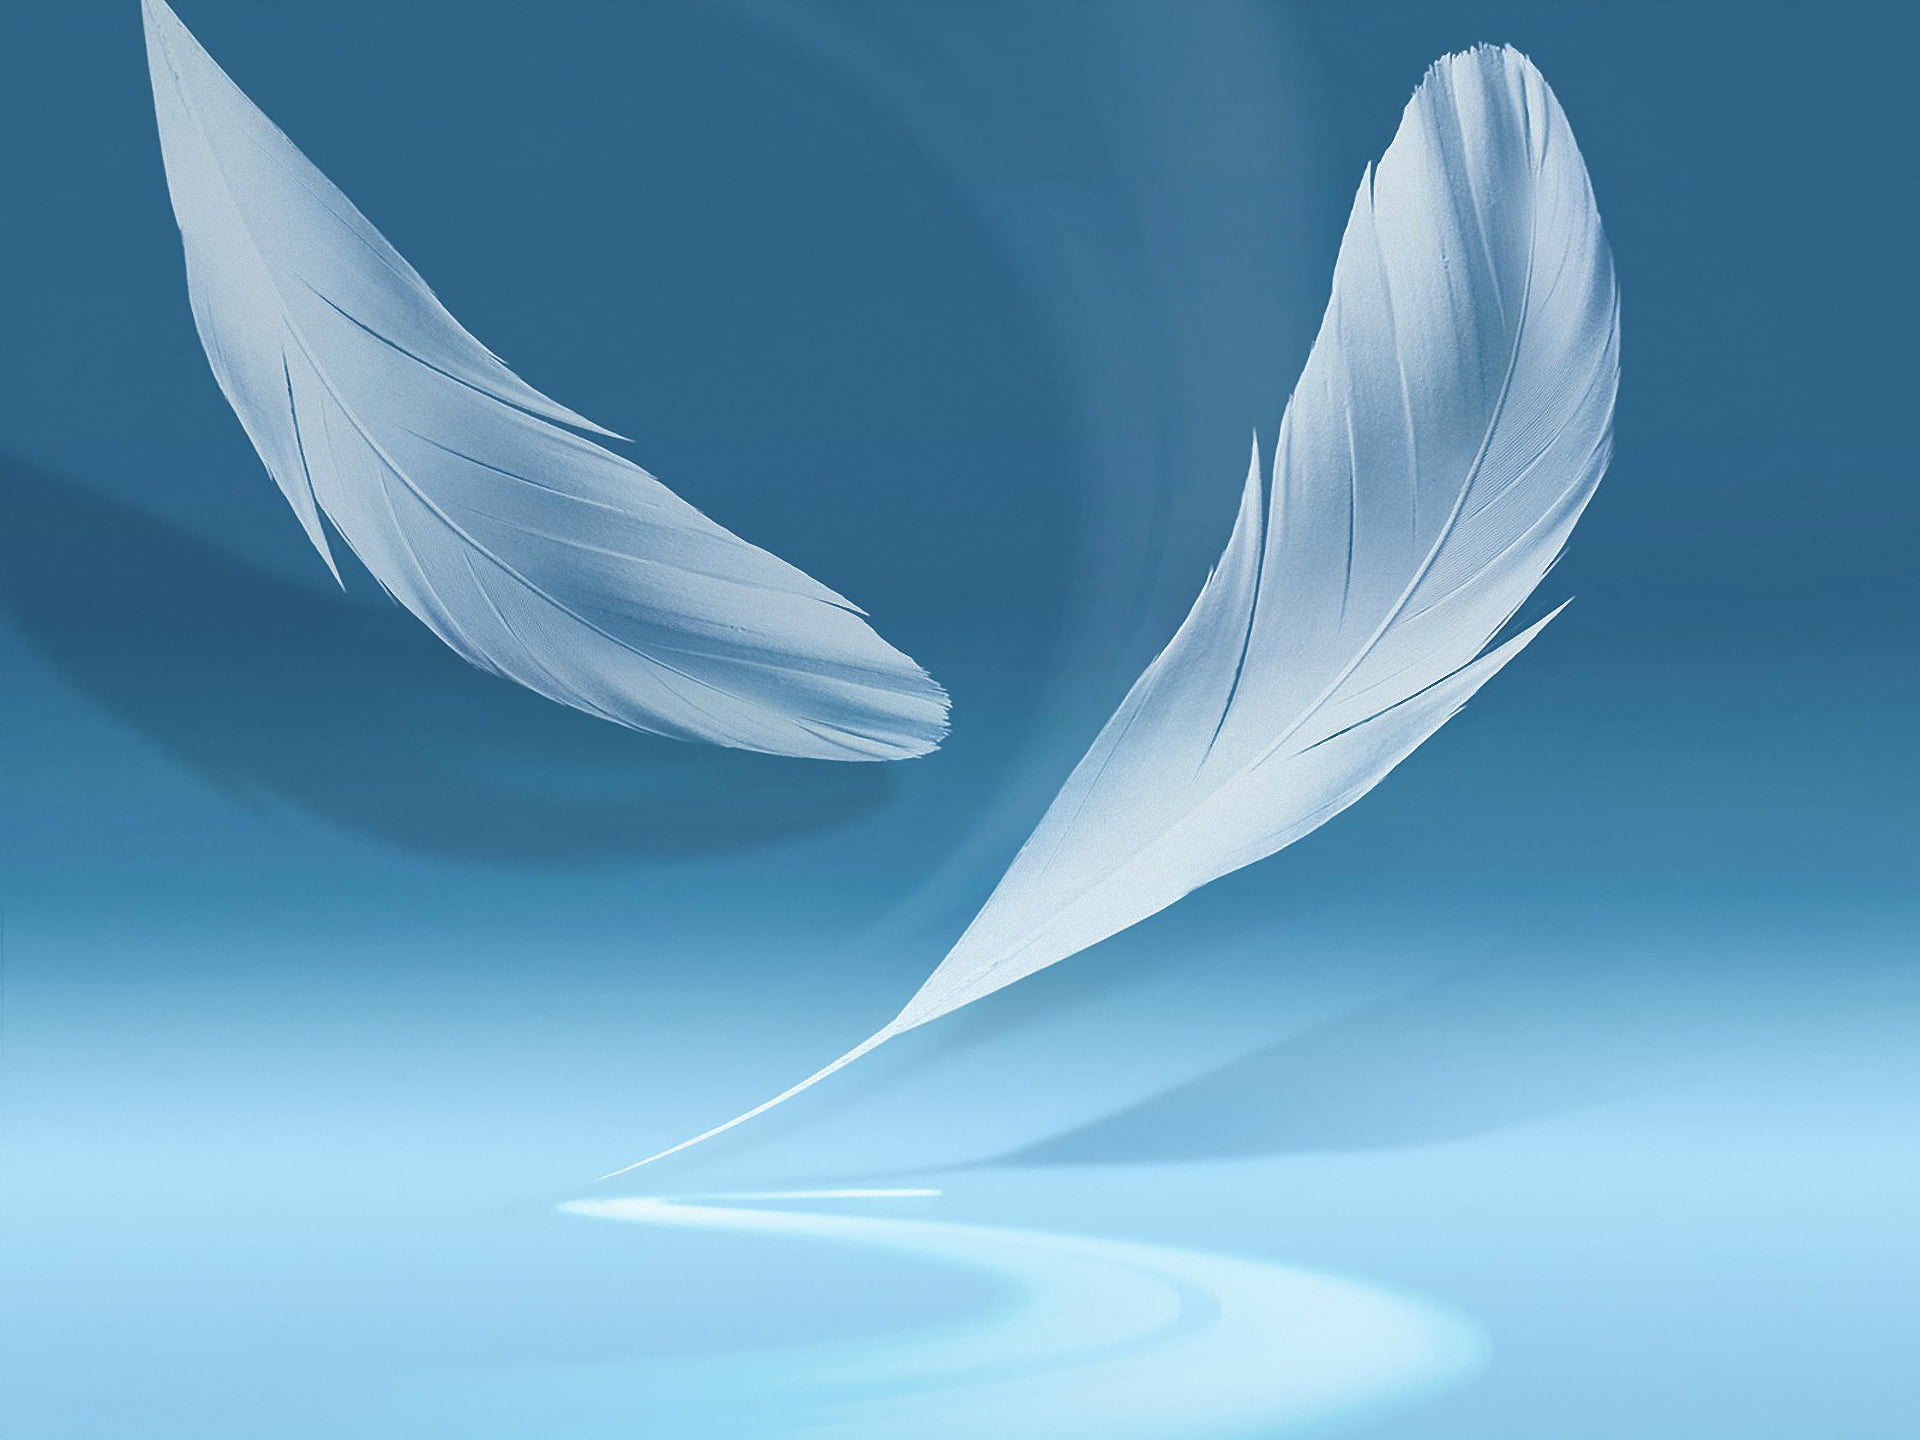 two white feathers, background, shadow, Galaxy Note 2, abstract